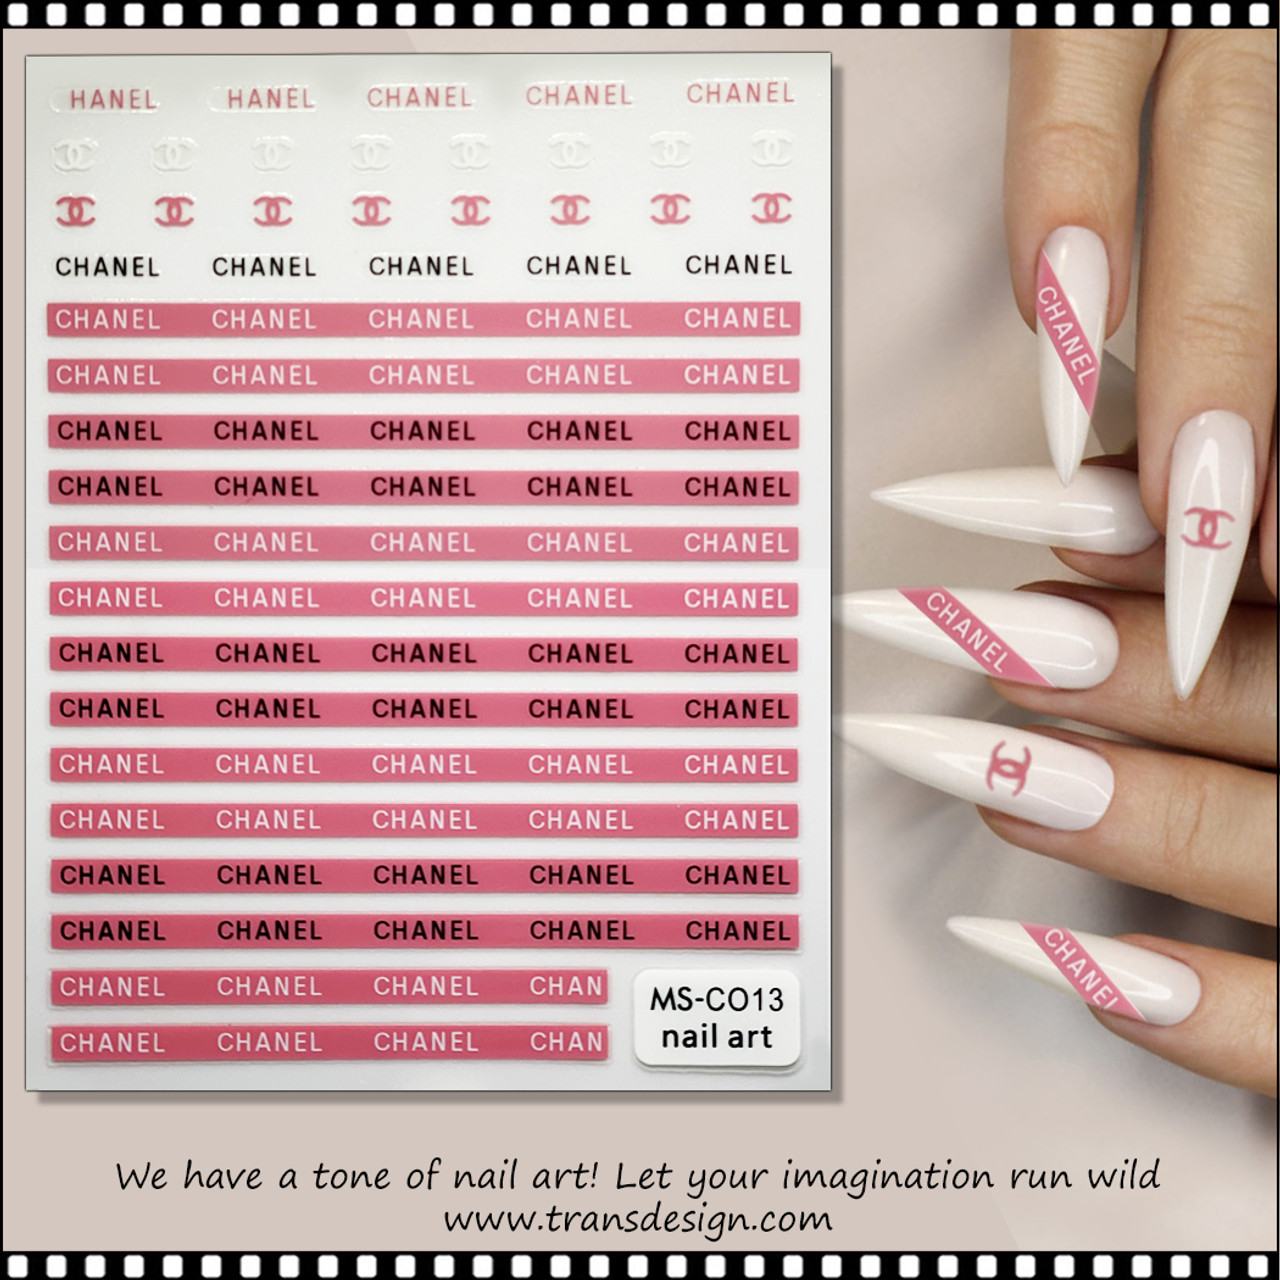 NAIL STICKER Brands Name, CHANEL, Love #DP3114